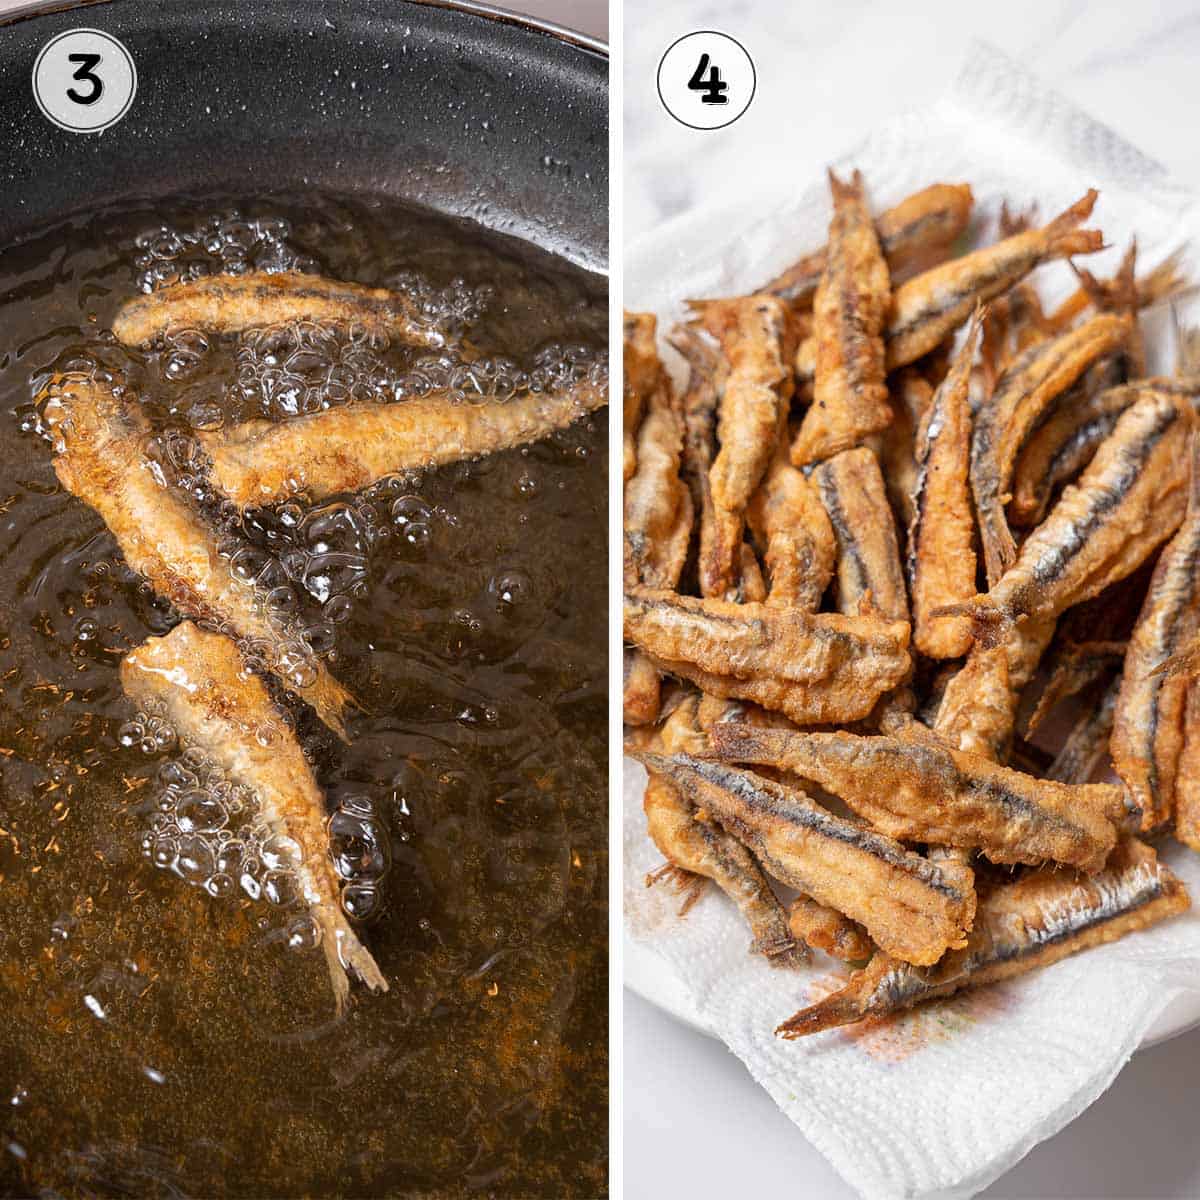 frying the anchovies and draining them.